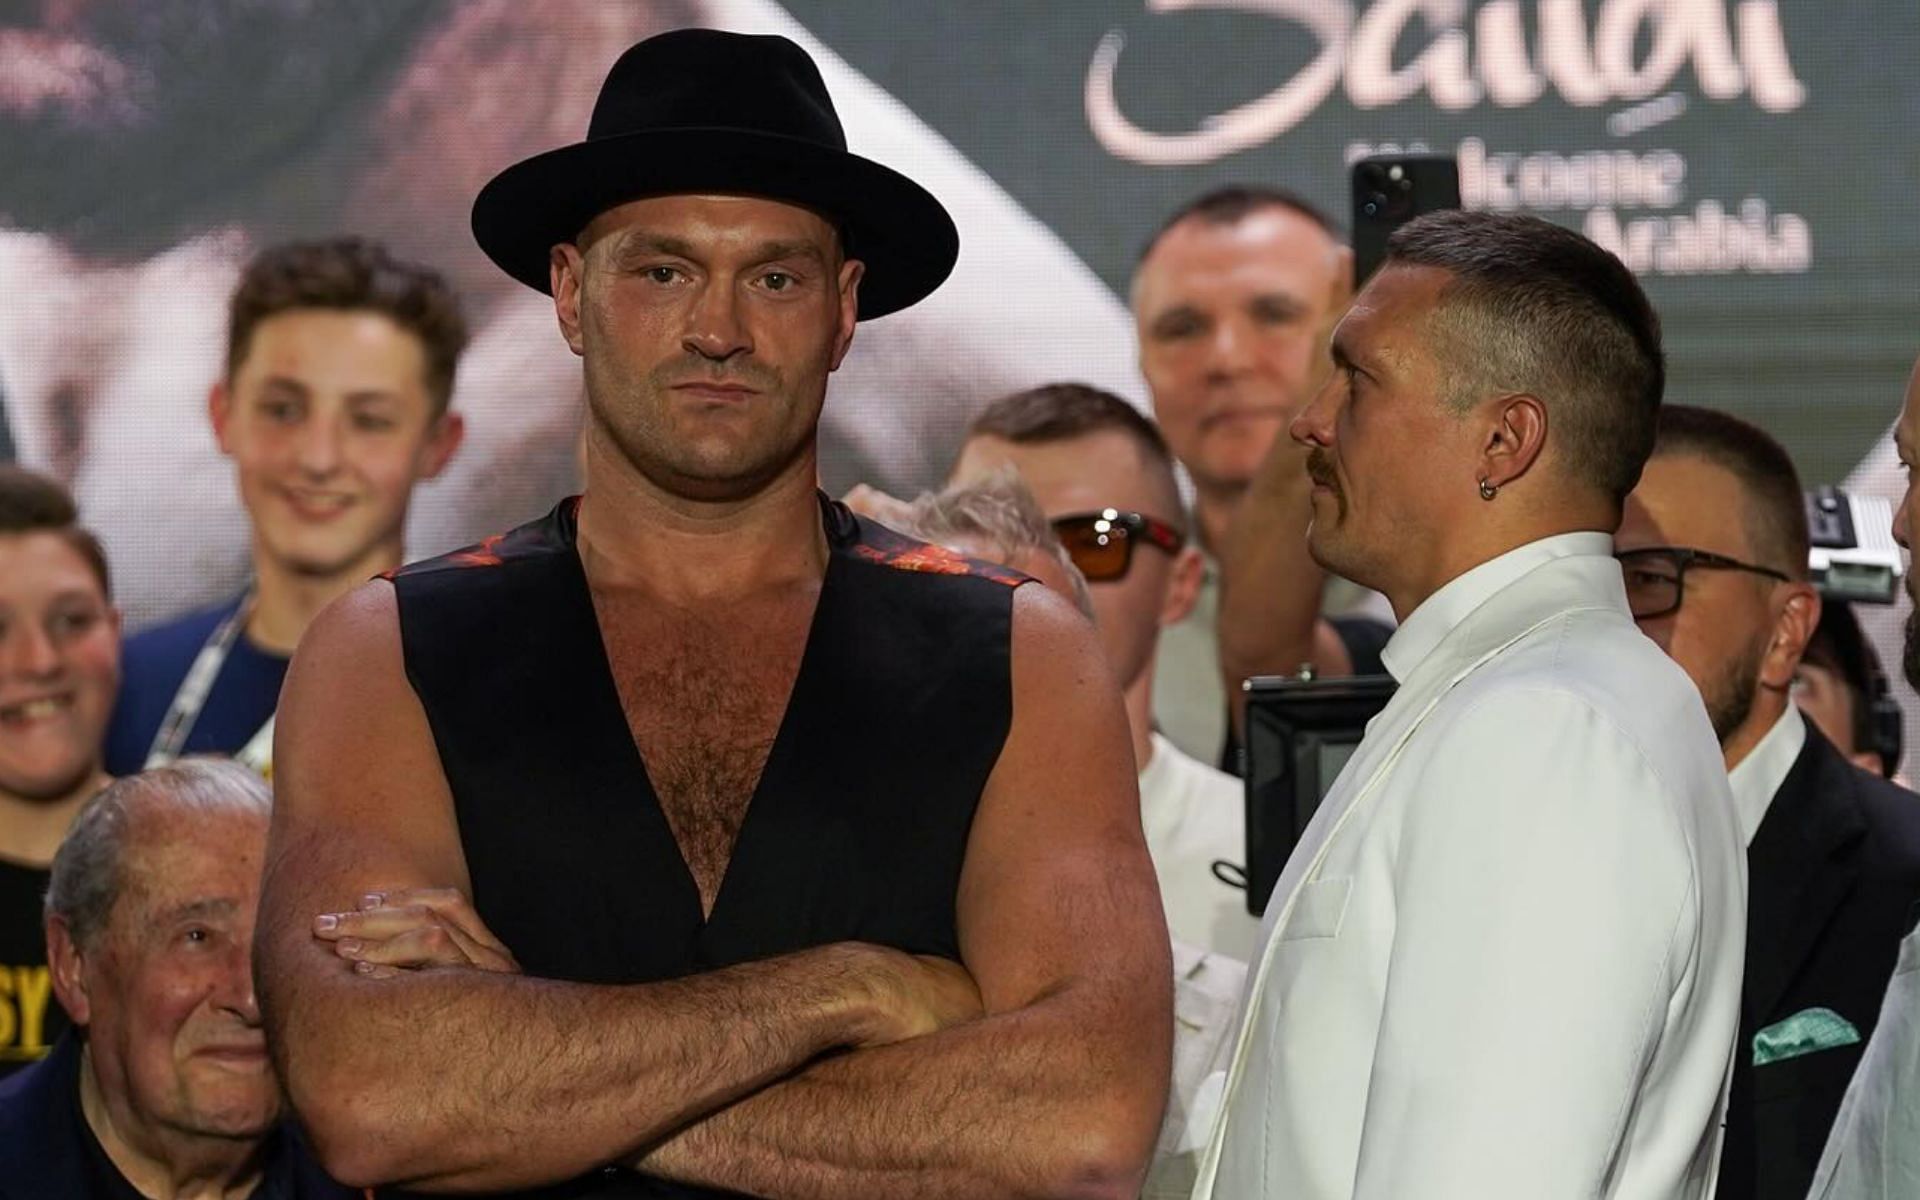 Tyson Fury (left) comments on his refusal to look at Oleksandr Usyk (right) during the Ring of Fire face-off [Photo Courtesy @tysonfury on Instagram]